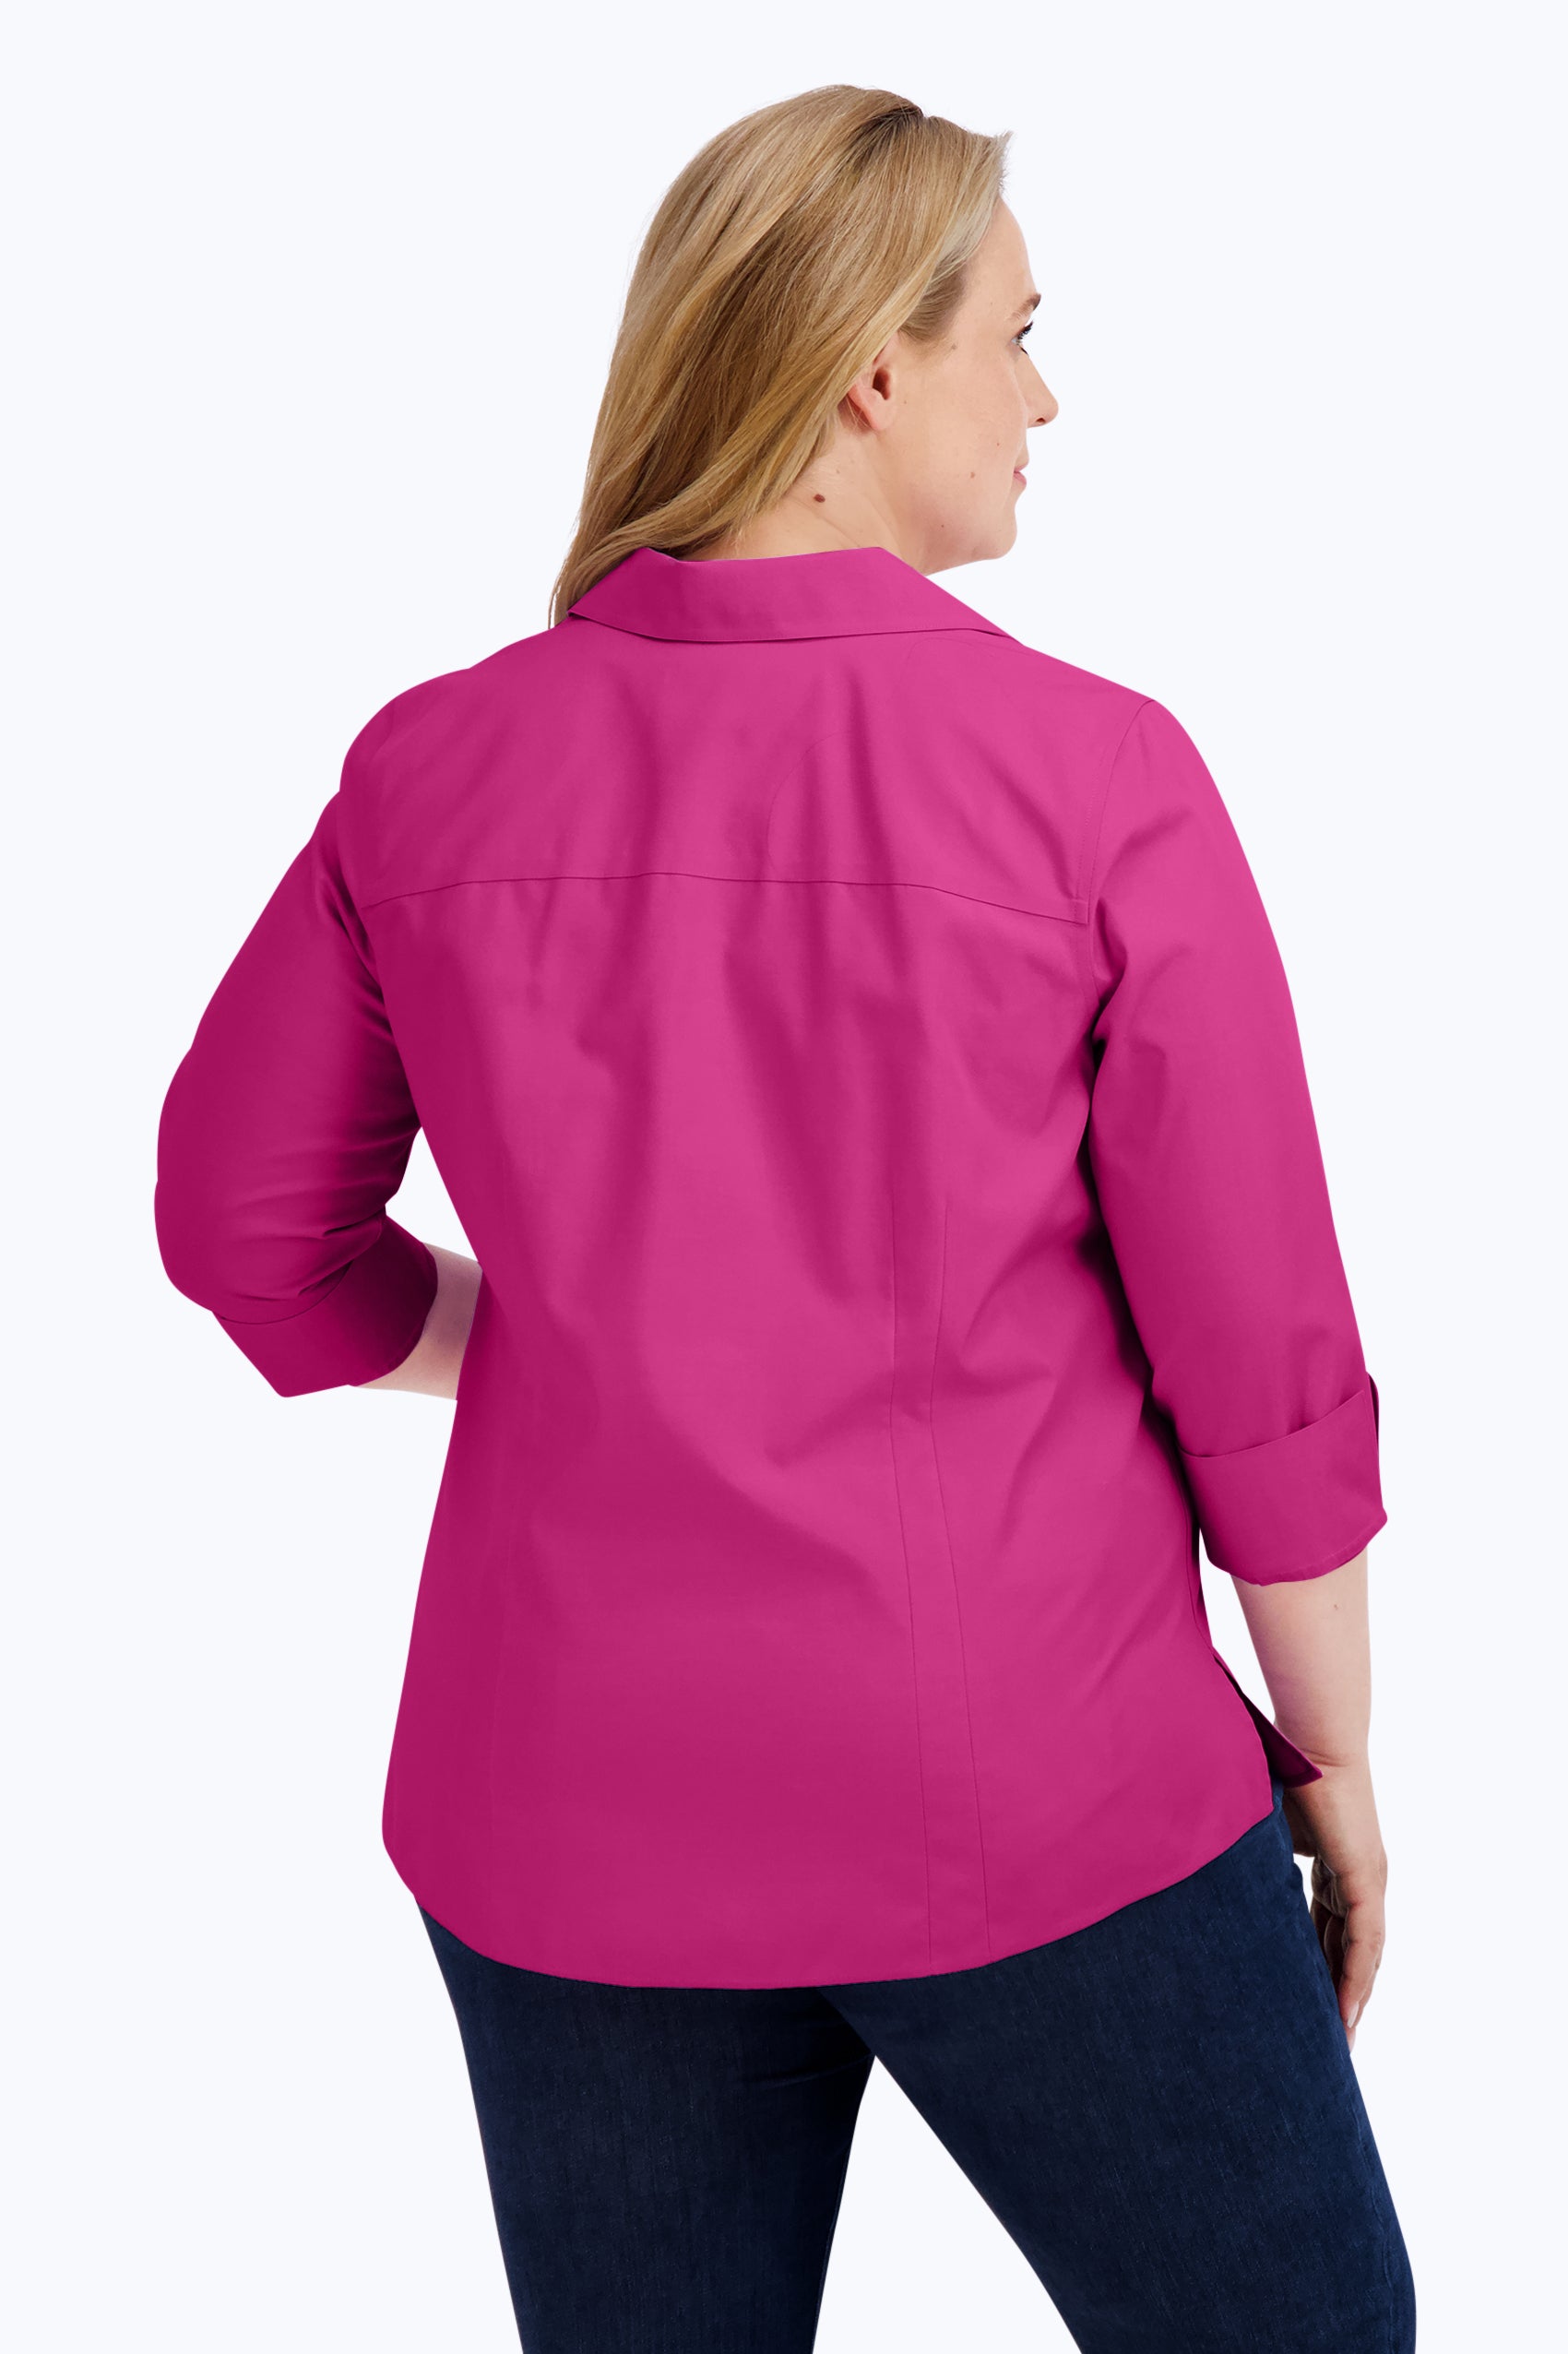 Taylor Plus Essential Pinpoint Non-Iron Shirt